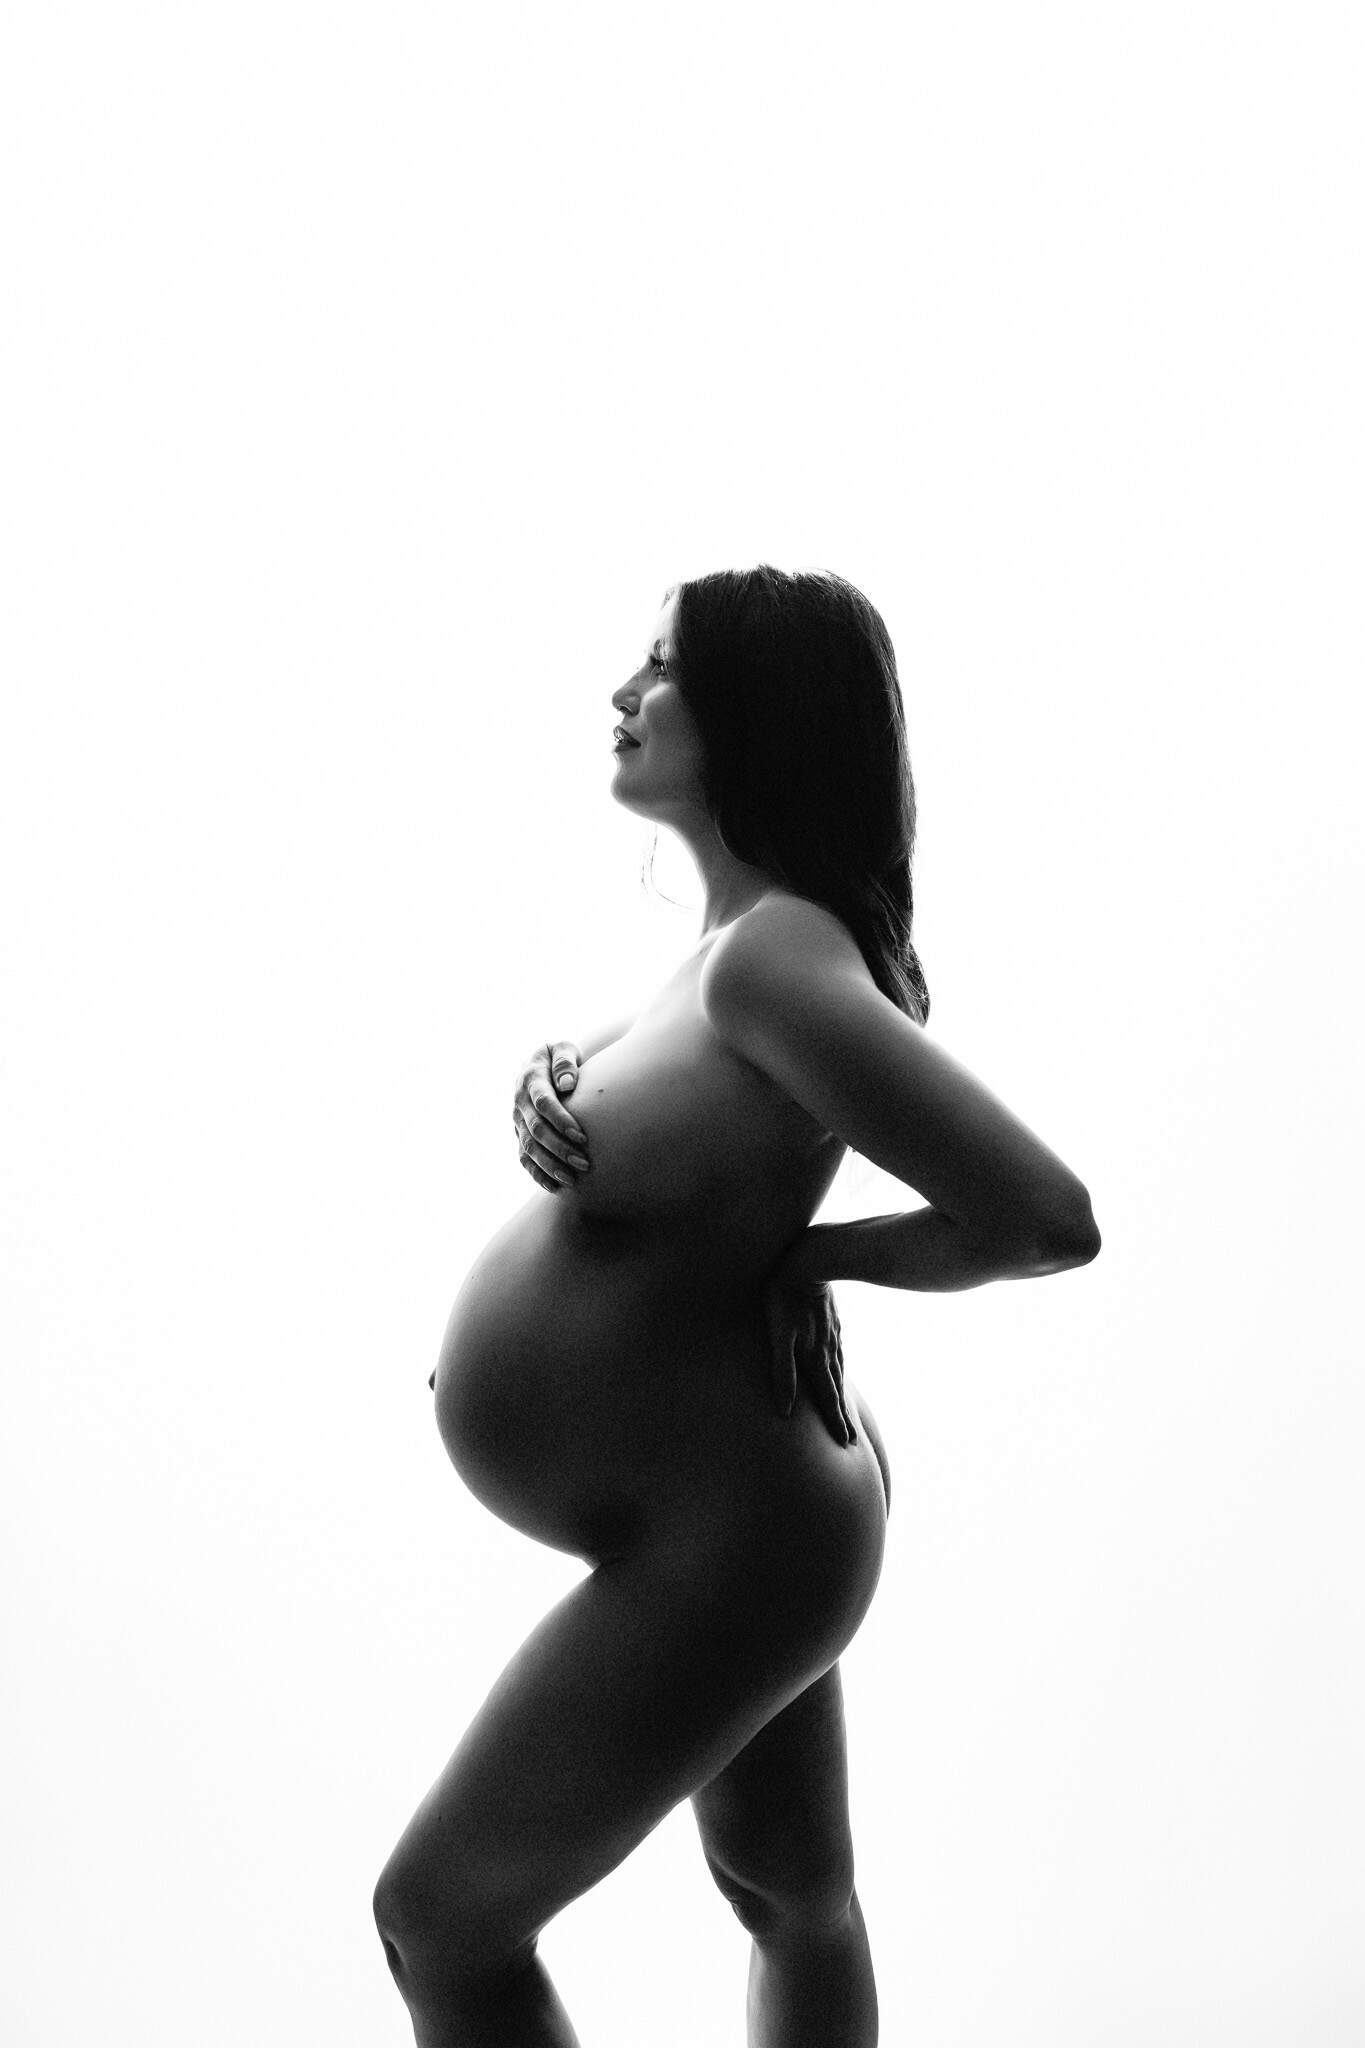 Fine art black and white backlit implied nudity at maternity photoshoot in Pennsylvania.